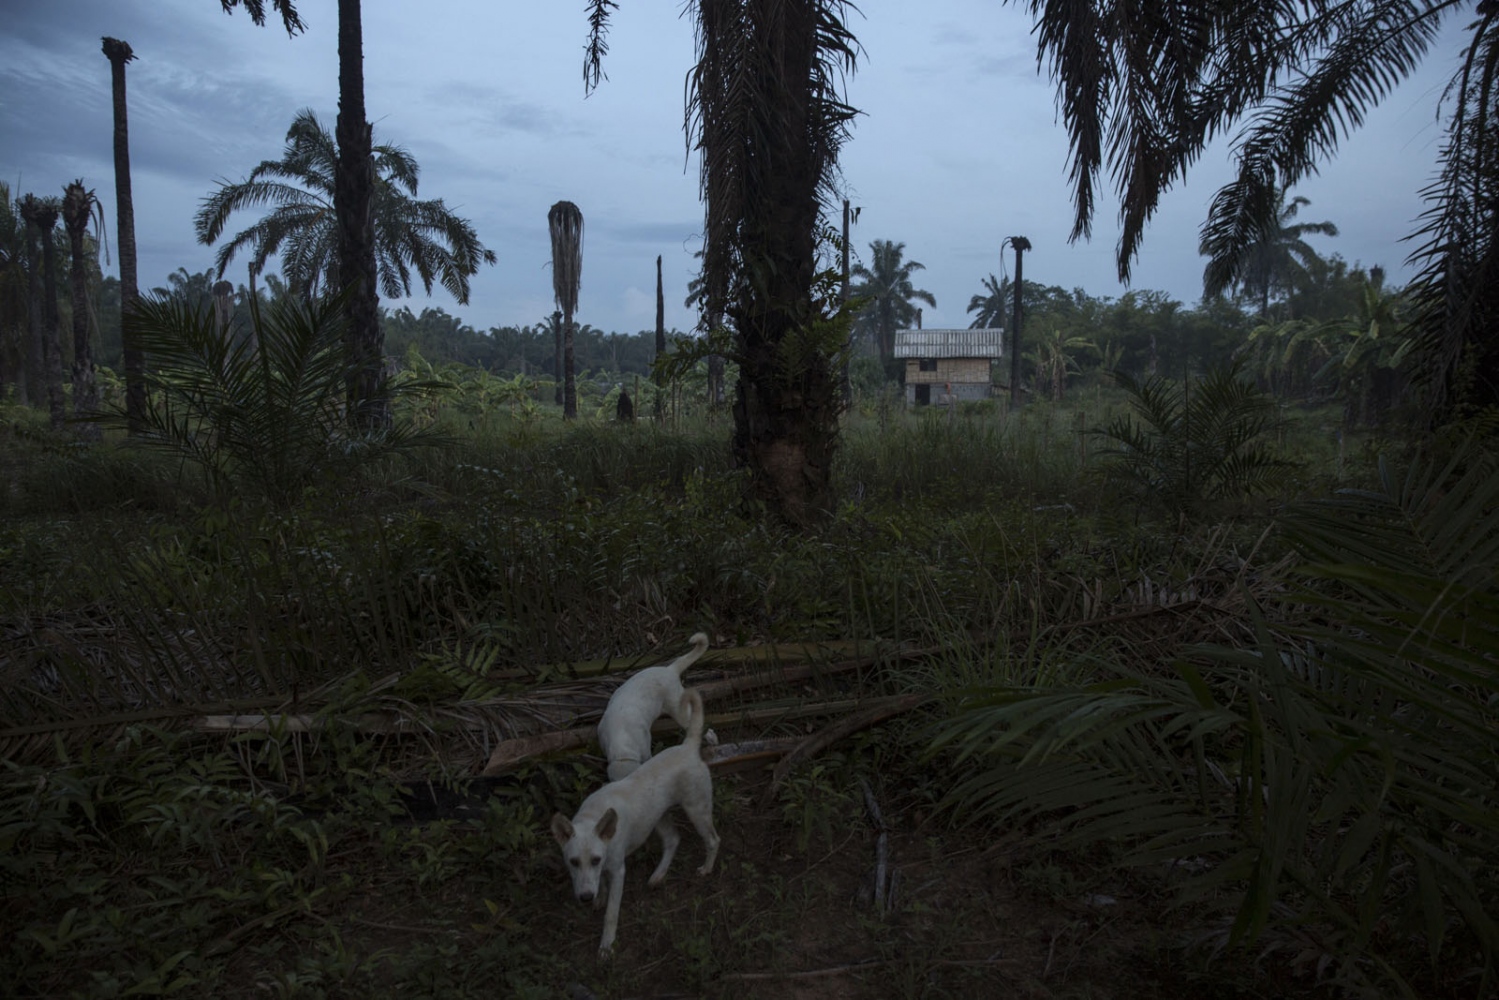 A house in Klong Sai Pattana village stands in a clearing in what once was a palm oil plantation....